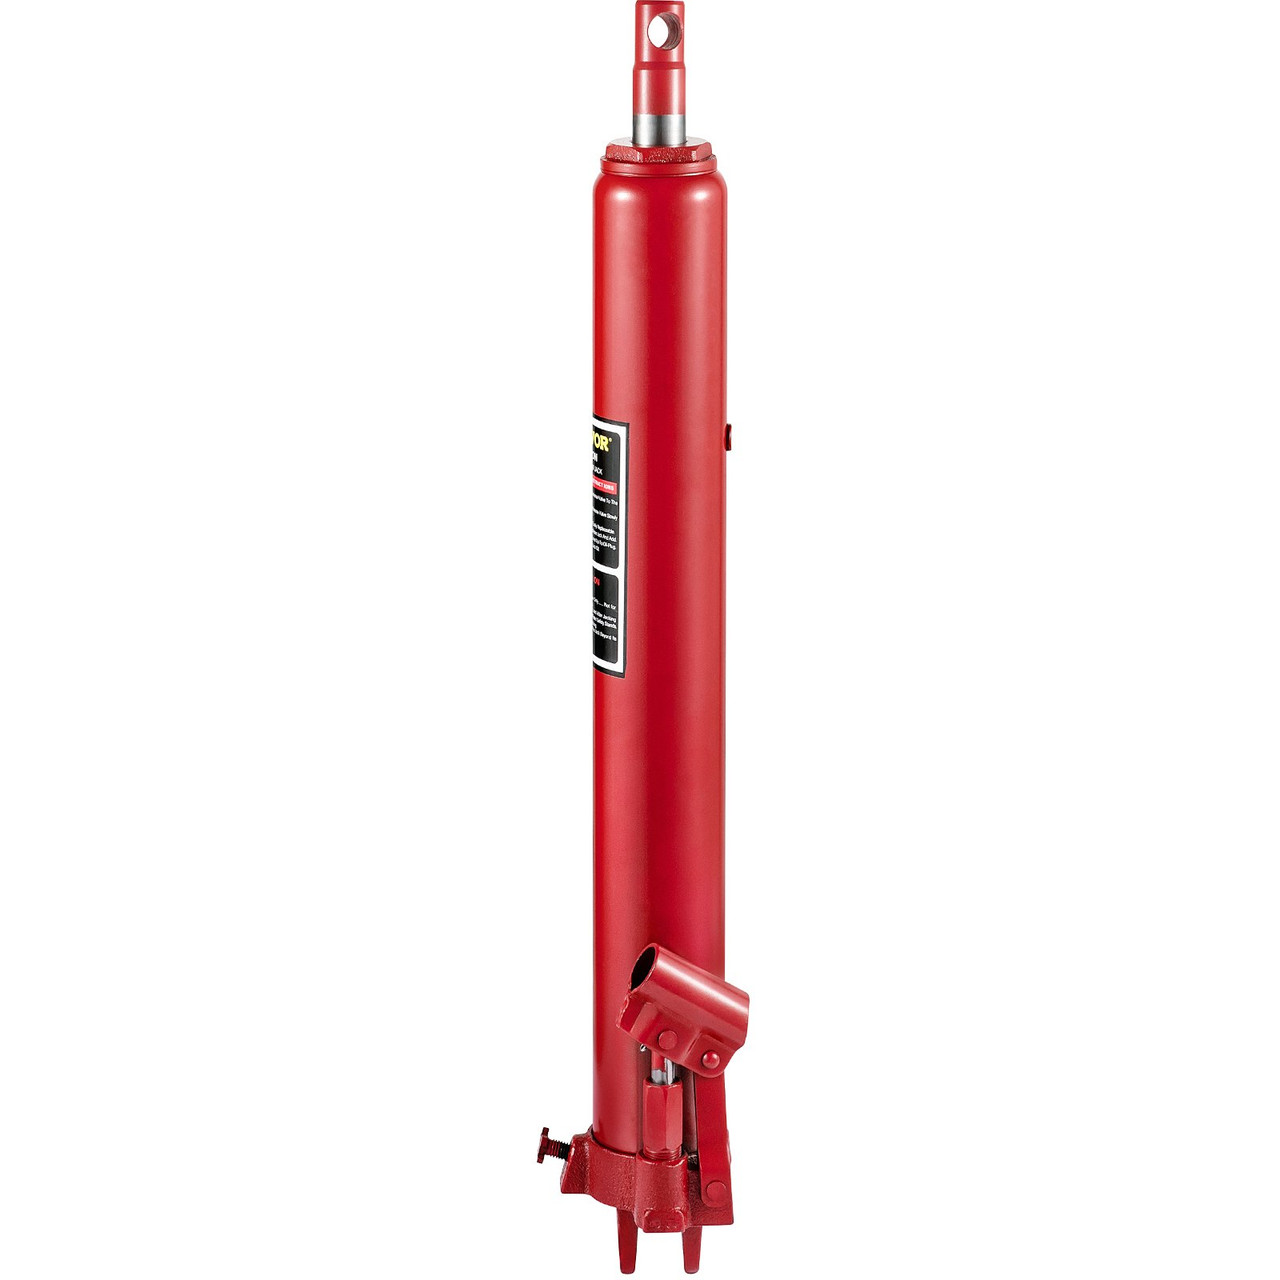 VEVOR Hydraulic Long Ram Jack, 3 Tons/6600 lbs Capacity, with Single Piston Pump and Clevis Base, Manual Cherry Picker w/Handle, for Garage/Shop Cranes, Engine Lift Hoist, Red